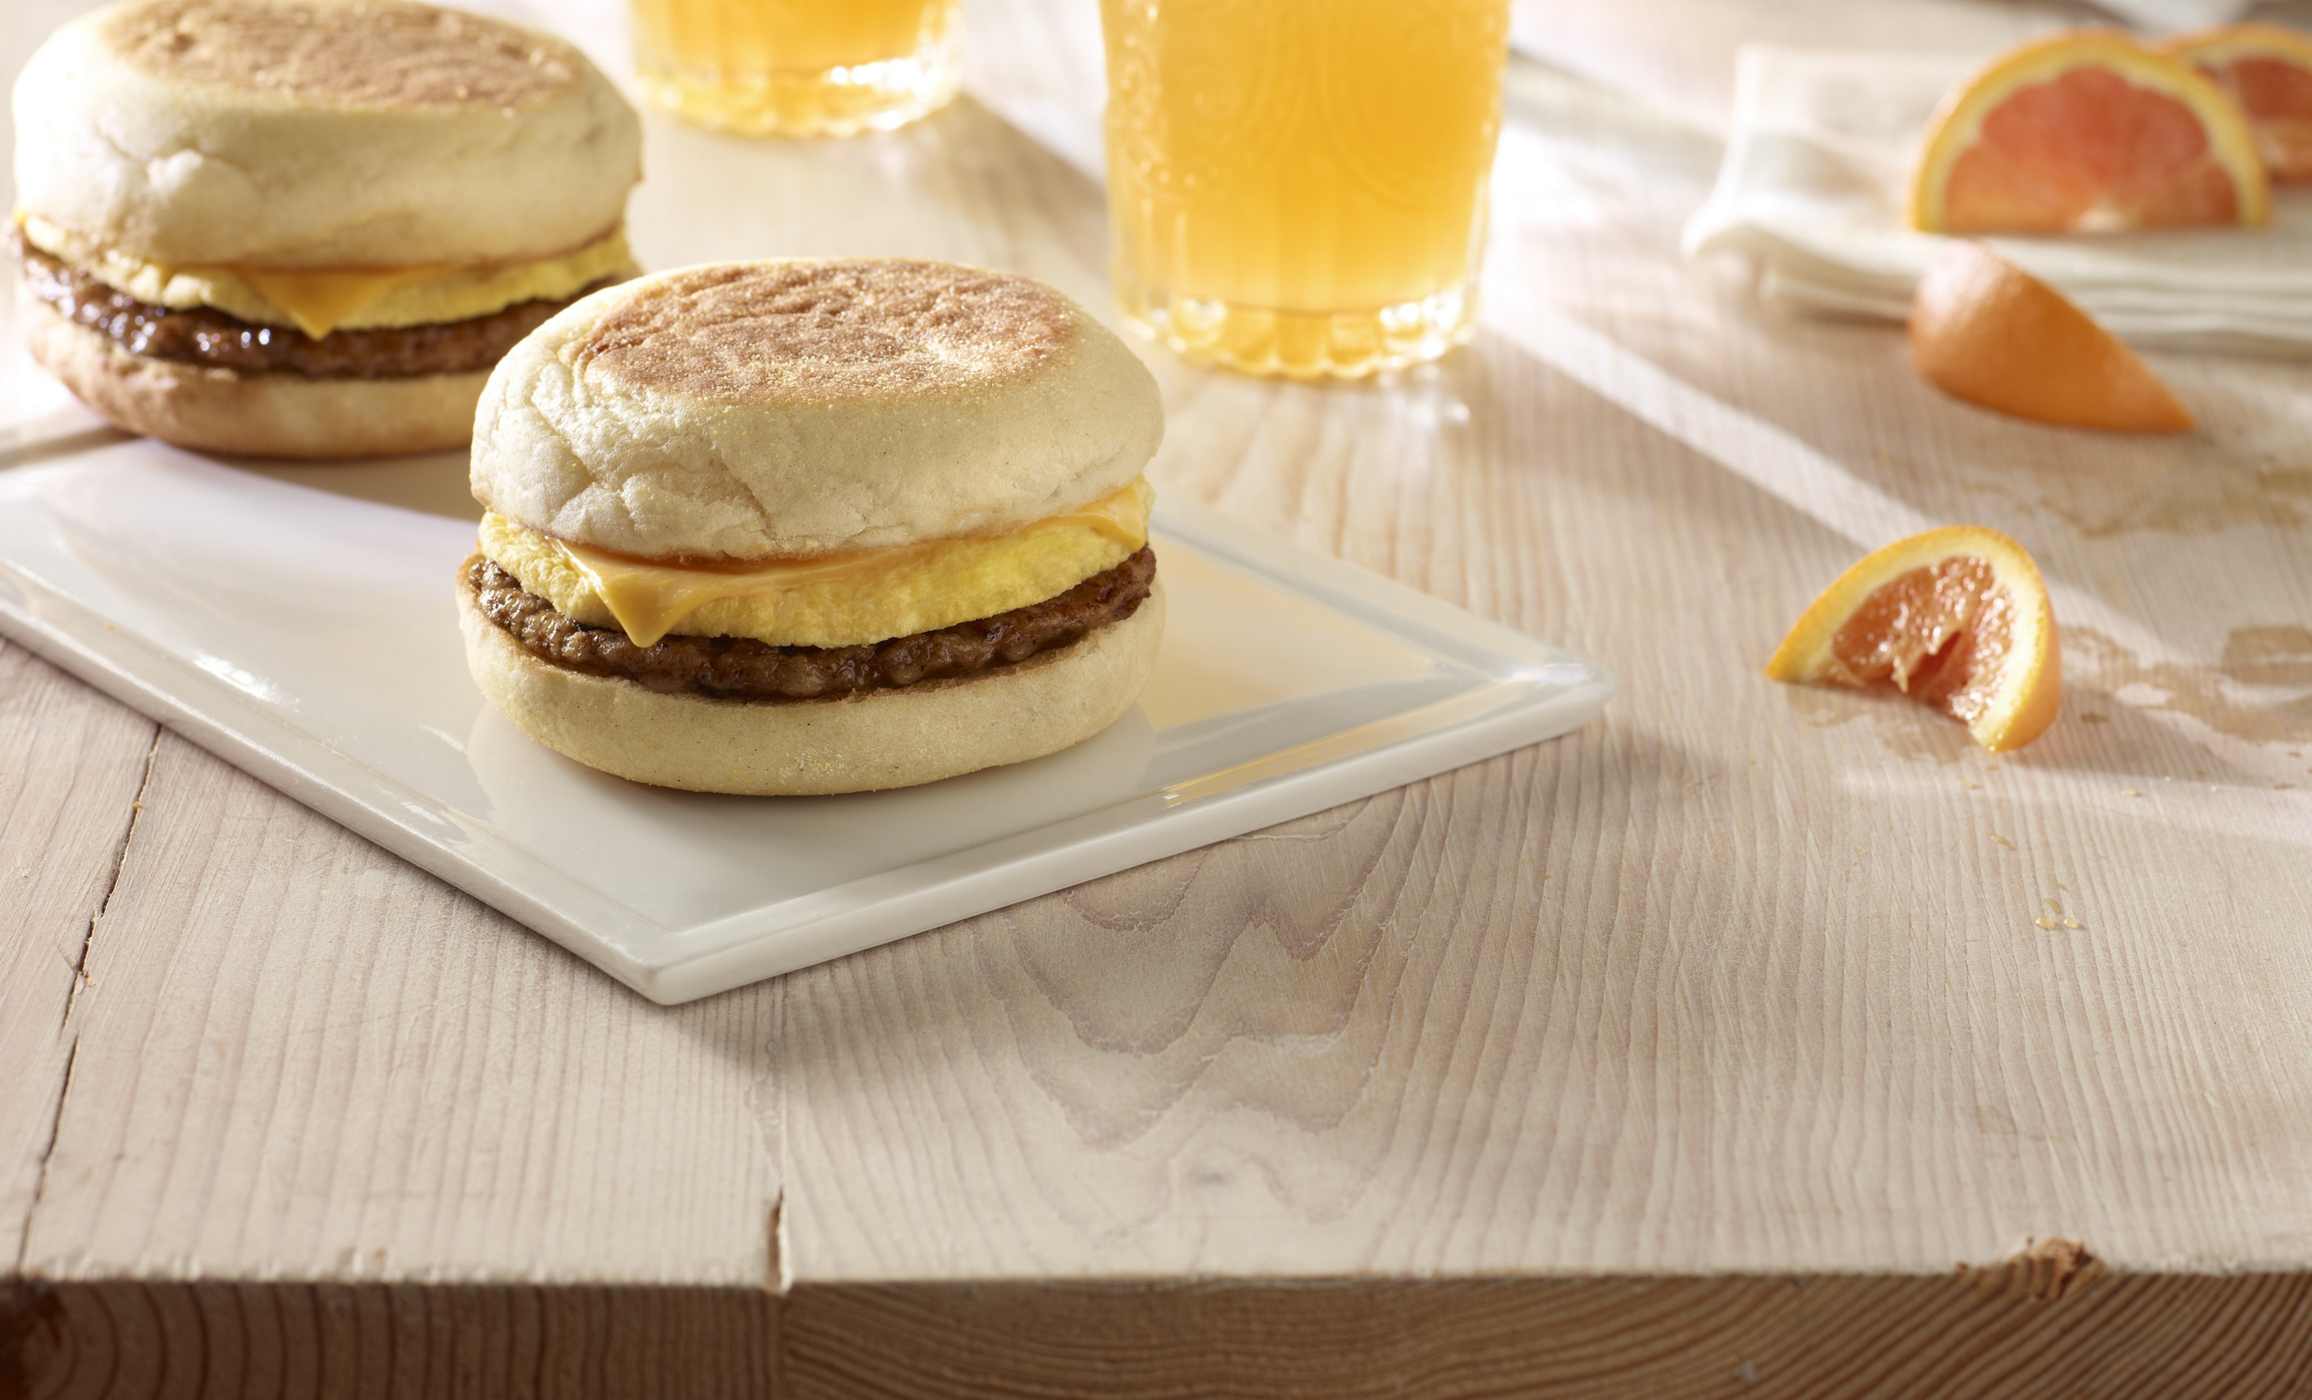 Jimmy Dean Sausage, Egg and Cheese English Muffin Sandwiches; image 2 of 2